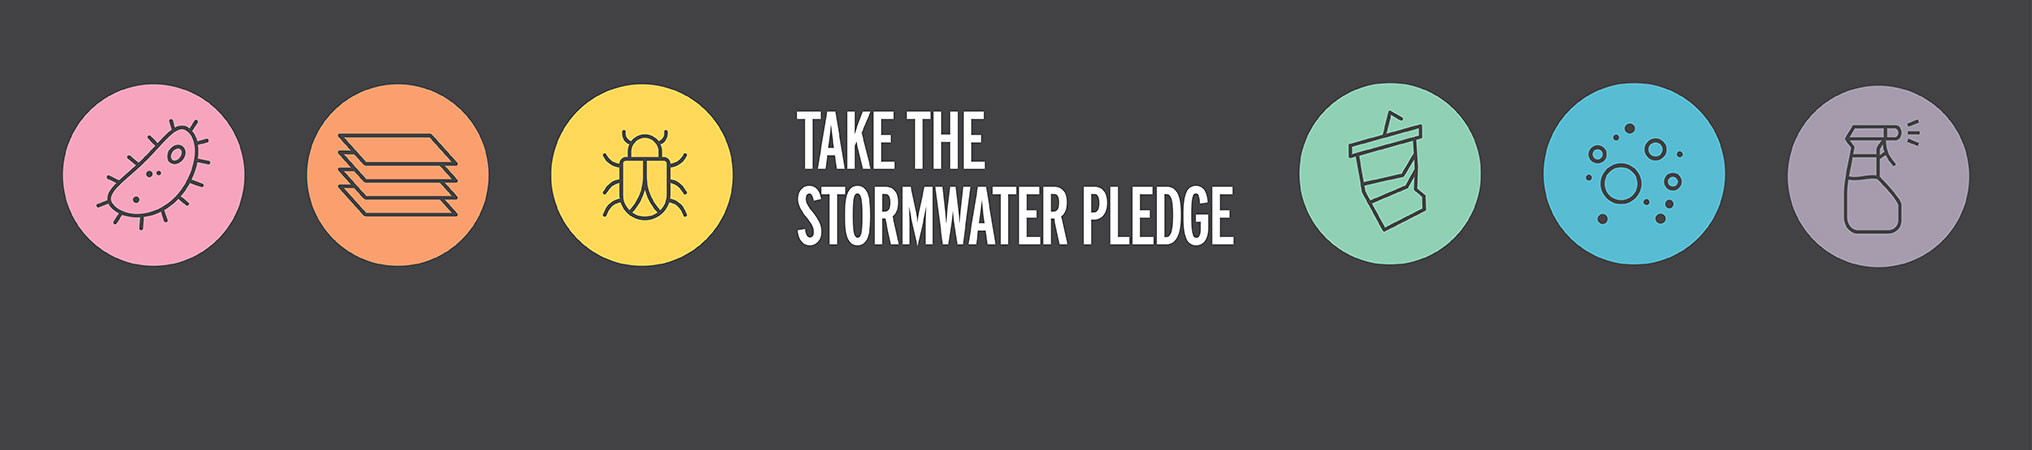 Take the Stormwater Pledge banner with contaminant type icons